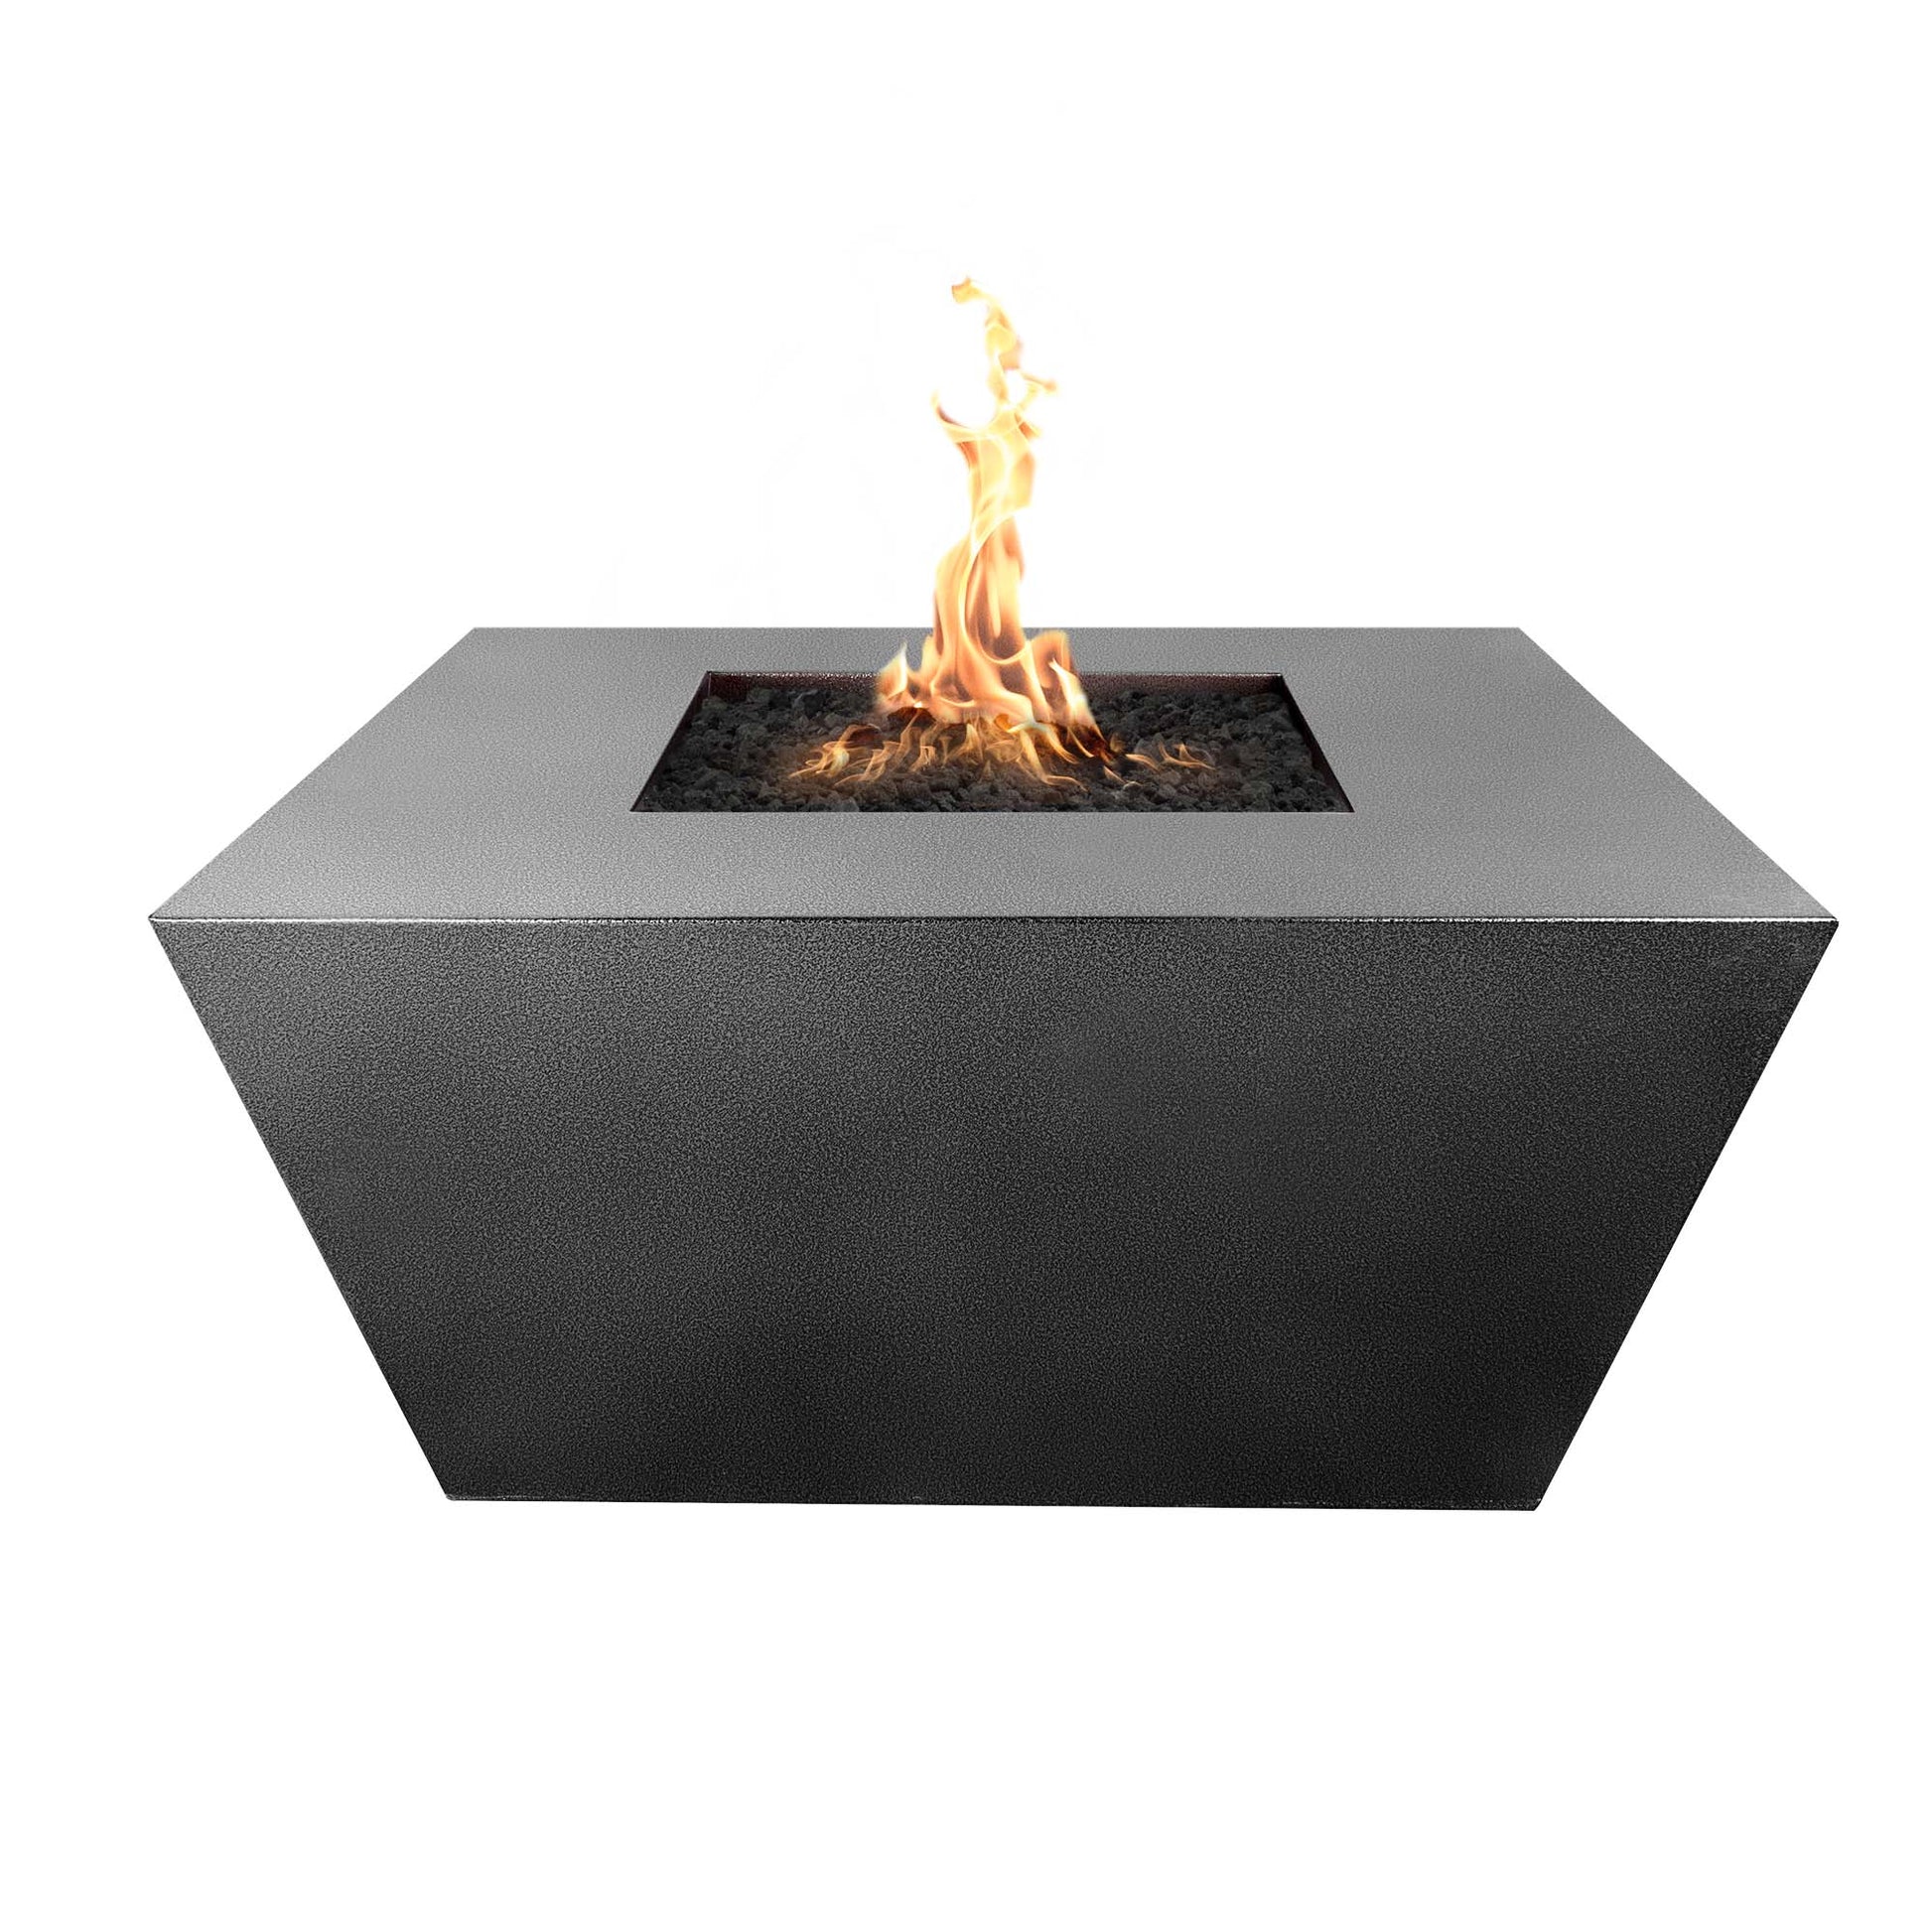 The Outdoor Plus Square Redan 36" Java Powder Coated Metal Natural Gas Fire Pit with 110V Electronic Ignition